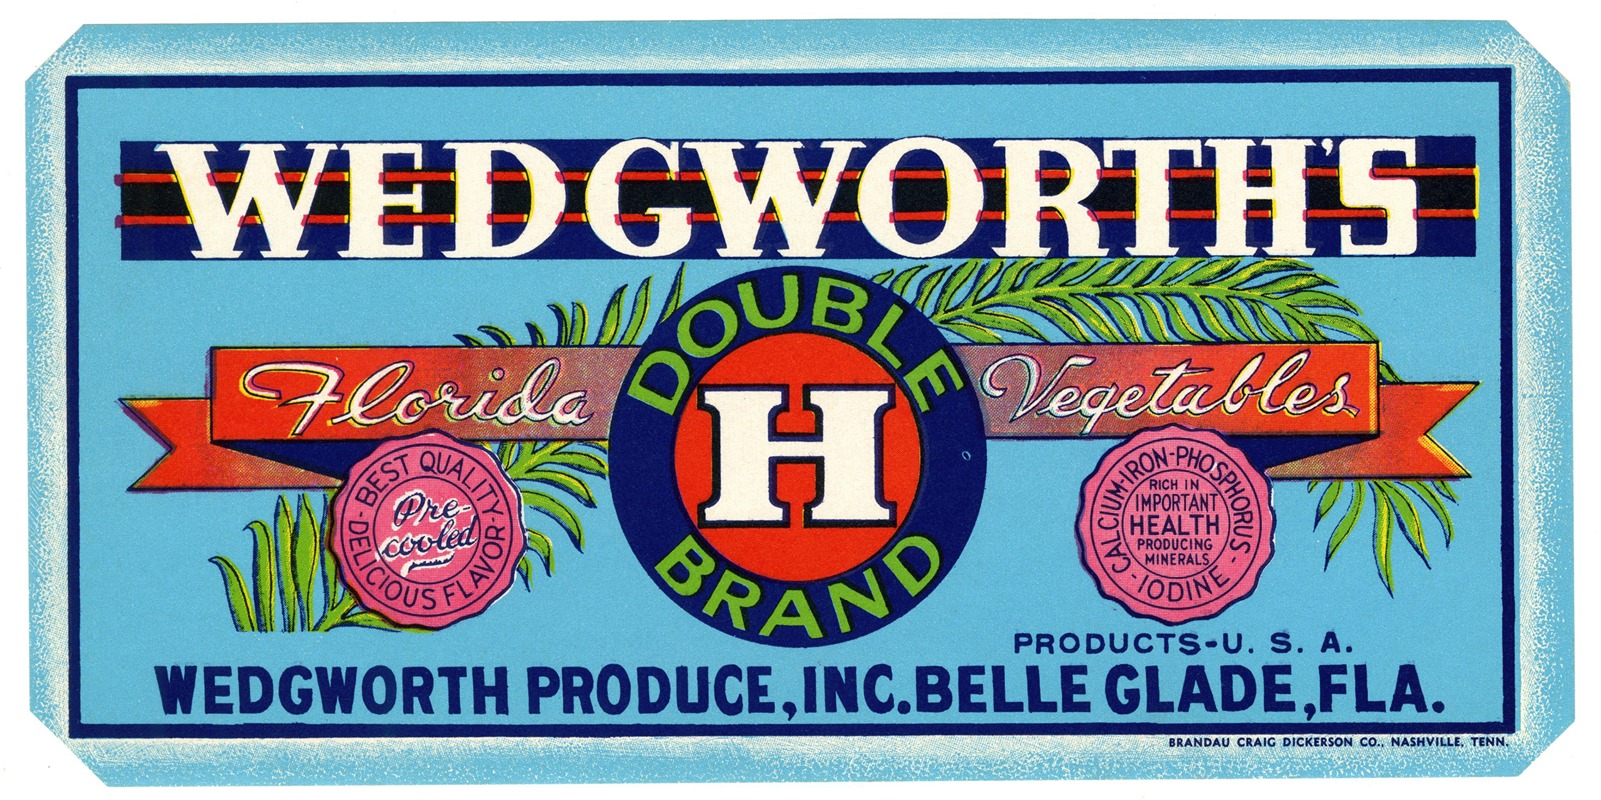 Anonymous - Wedgworth’s Double H Brand Florida Vegetables Label